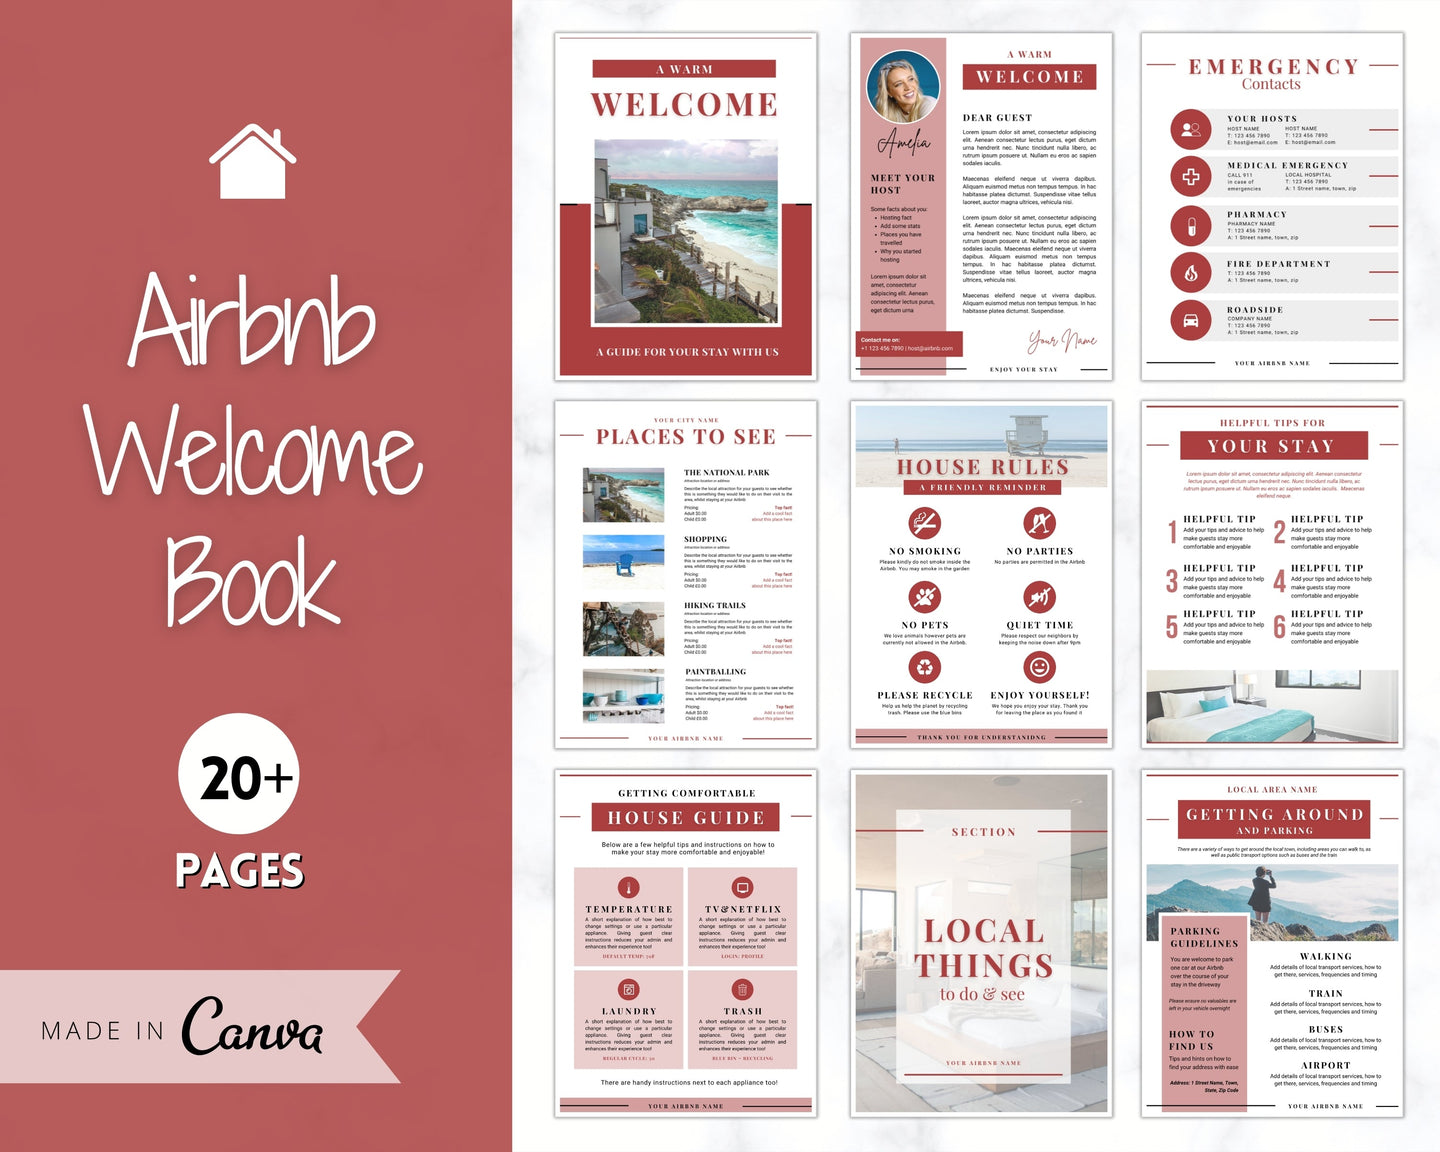 Welcome Book Template, Airbnb Welcome Guide, Editable Canva Air bnb House manual, Superhost eBook, Host signs, Signage, VRBO Vacation Rental | Red